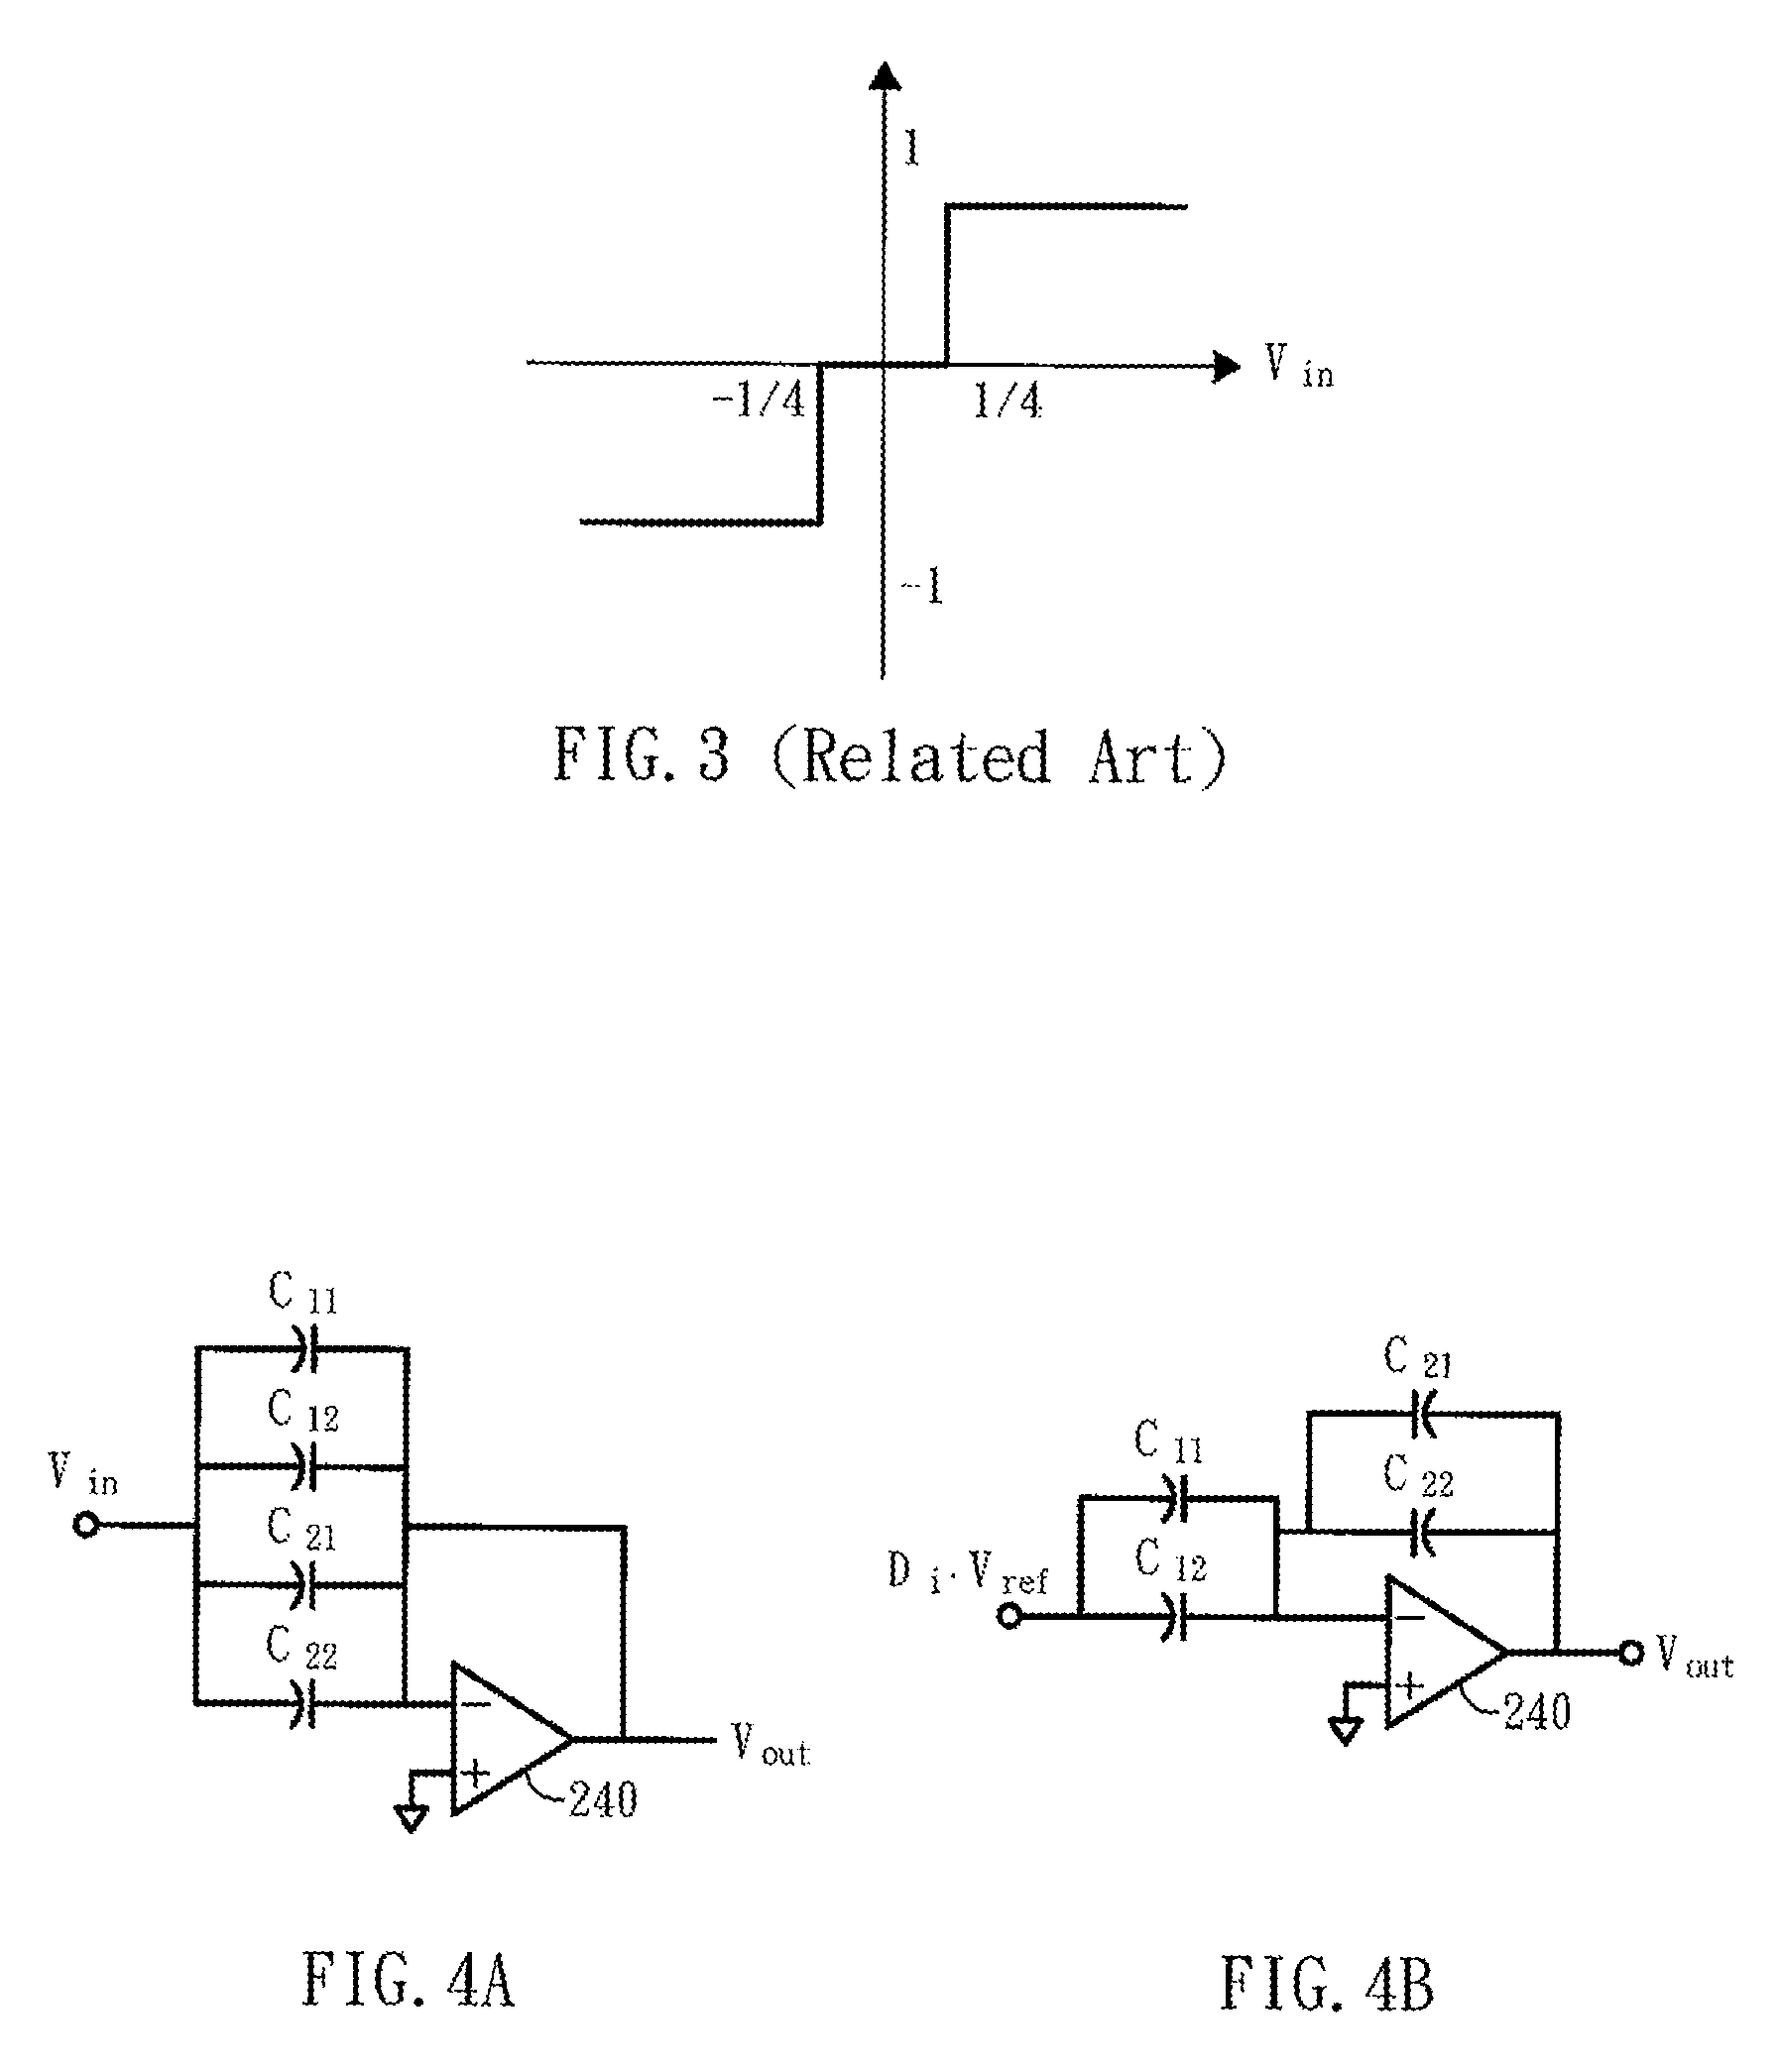 Pipelined analog to digital converter with capacitor mismatch compensation